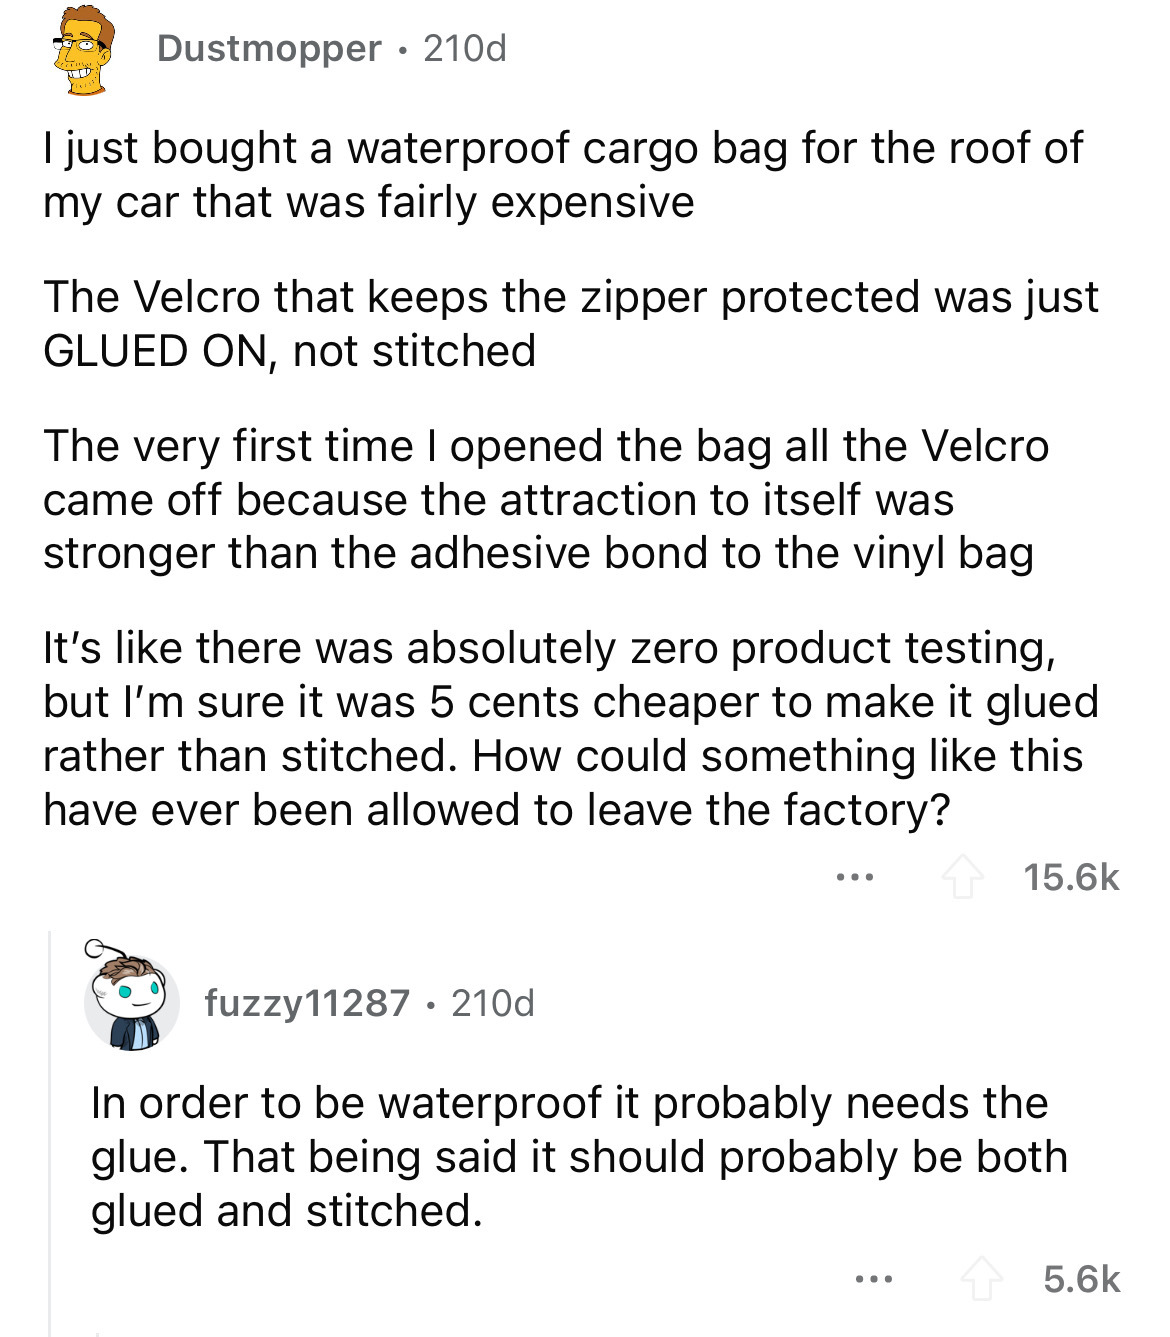 document - Dustmopper 210d I just bought a waterproof cargo bag for the roof of my car that was fairly expensive The Velcro that keeps the zipper protected was just Glued On, not stitched The very first time I opened the bag all the Velcro came off becaus